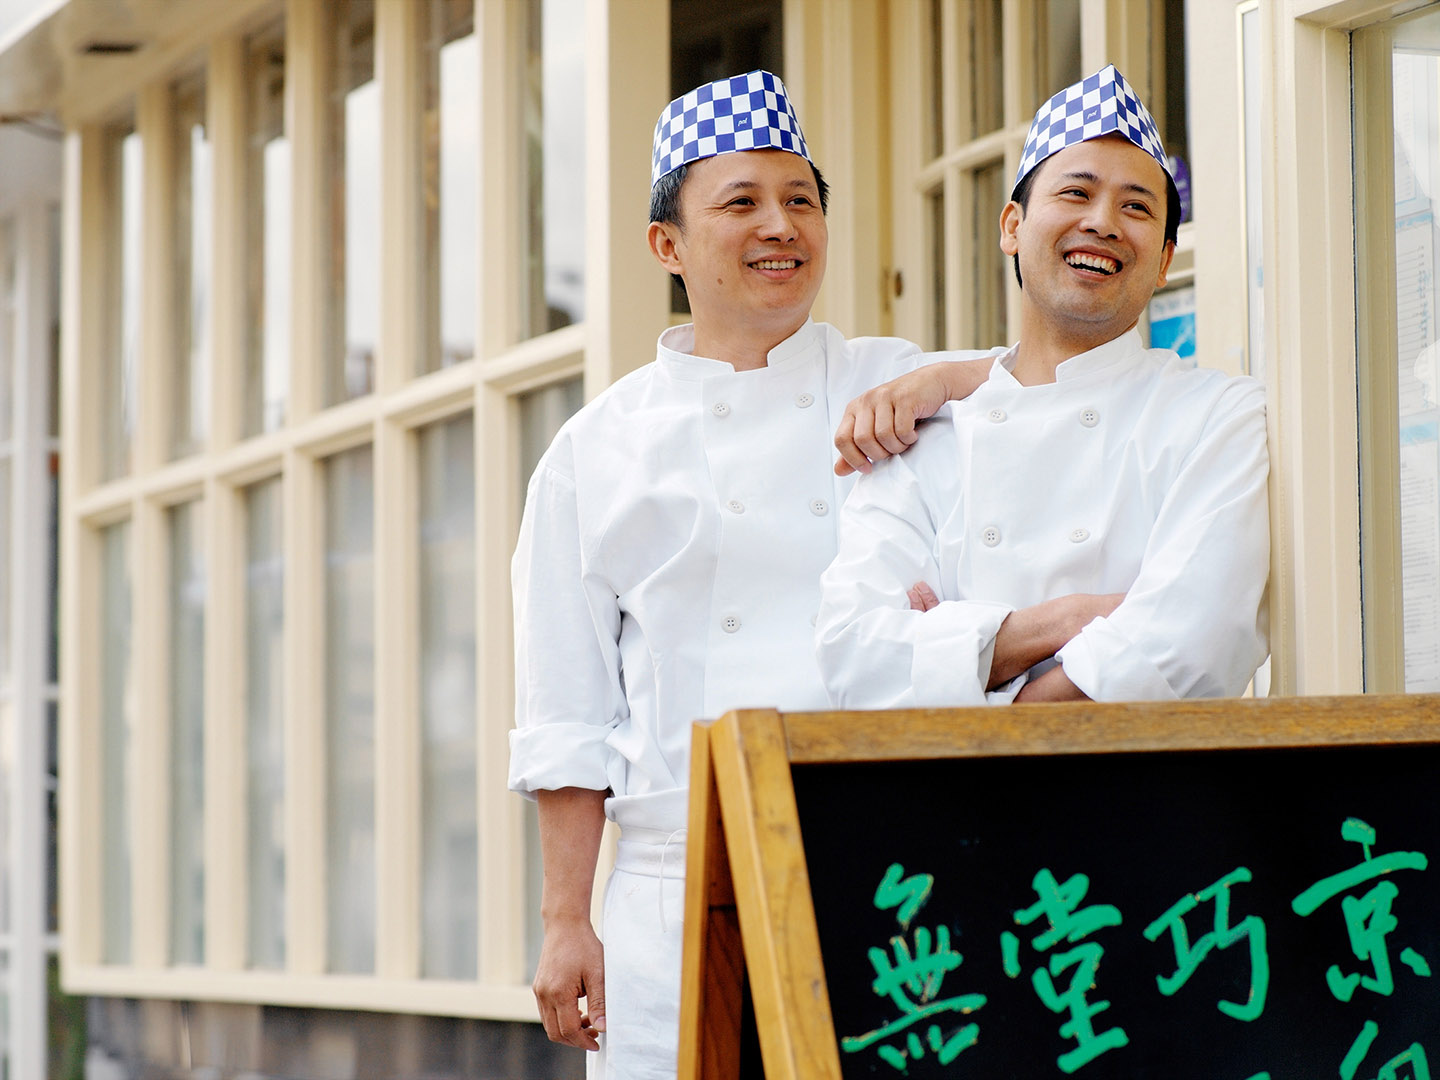 Two chefs smiling and laughing at the entrance to a Chinese restaurant